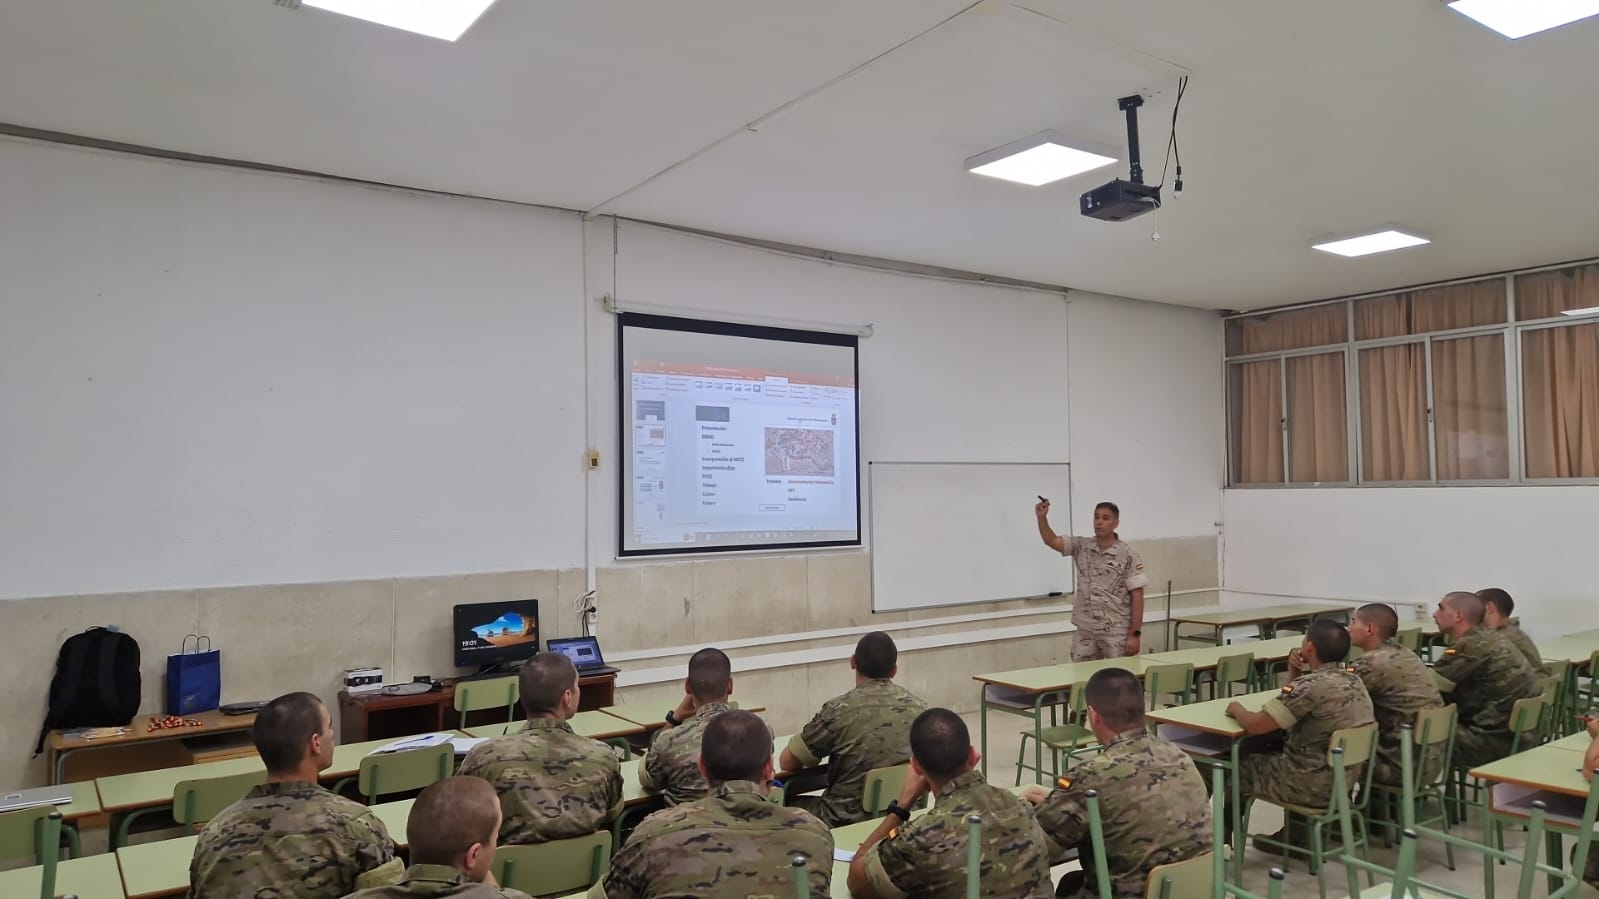 Corporal Major's lecture on the MCCE